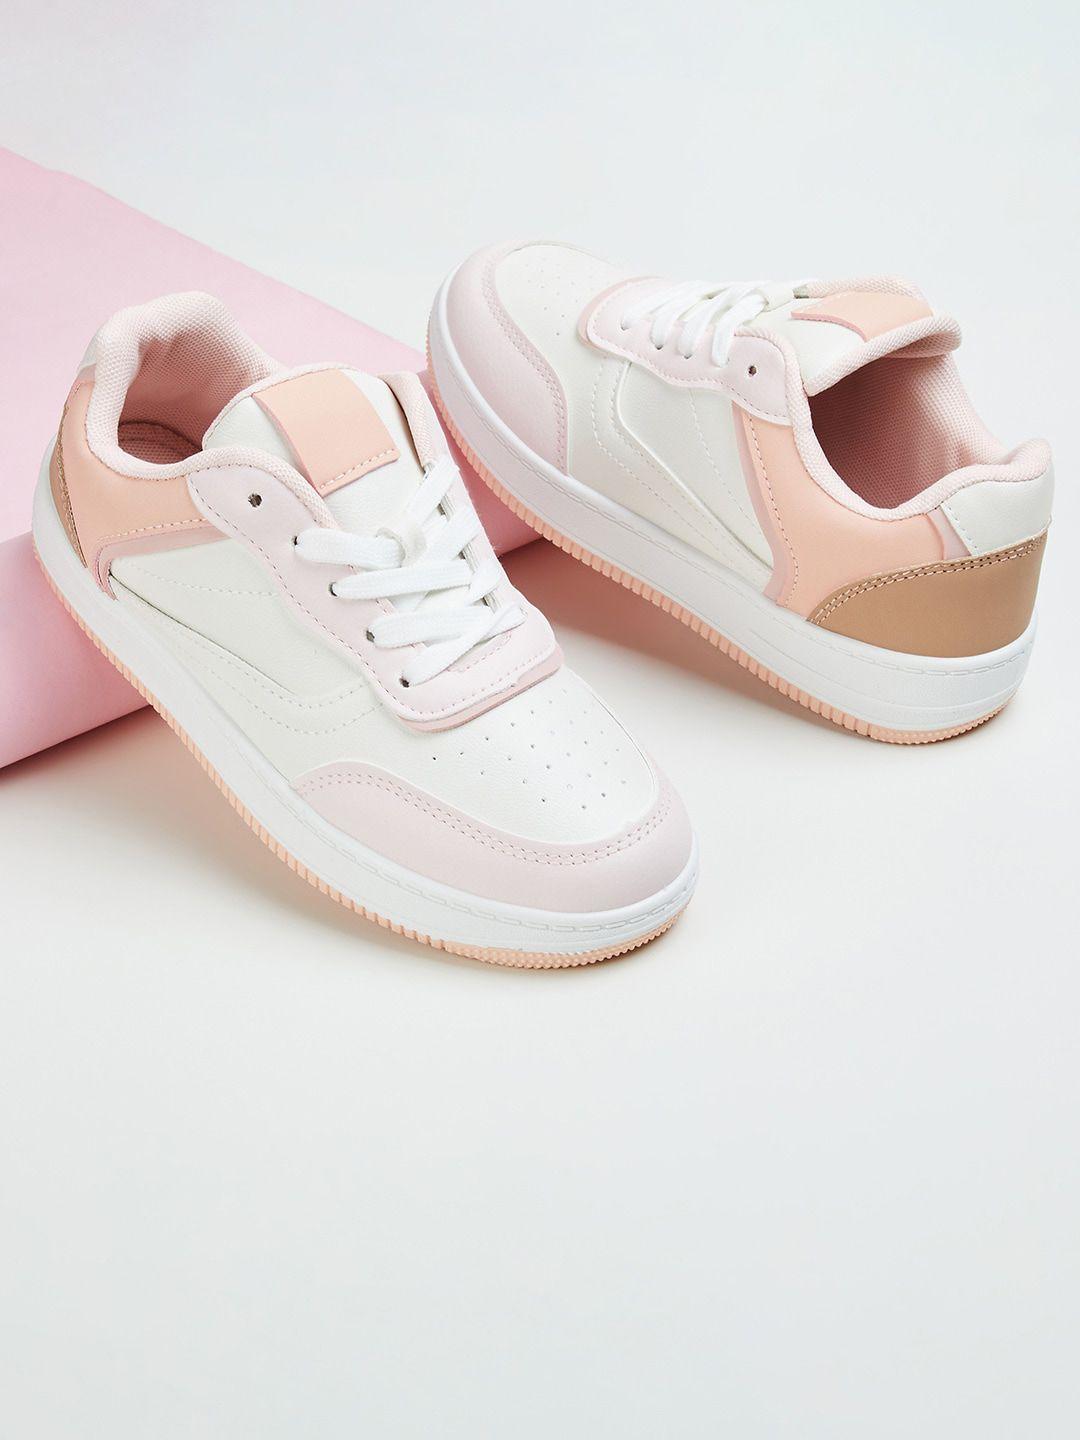 max-girls-colourblocked-sneakers